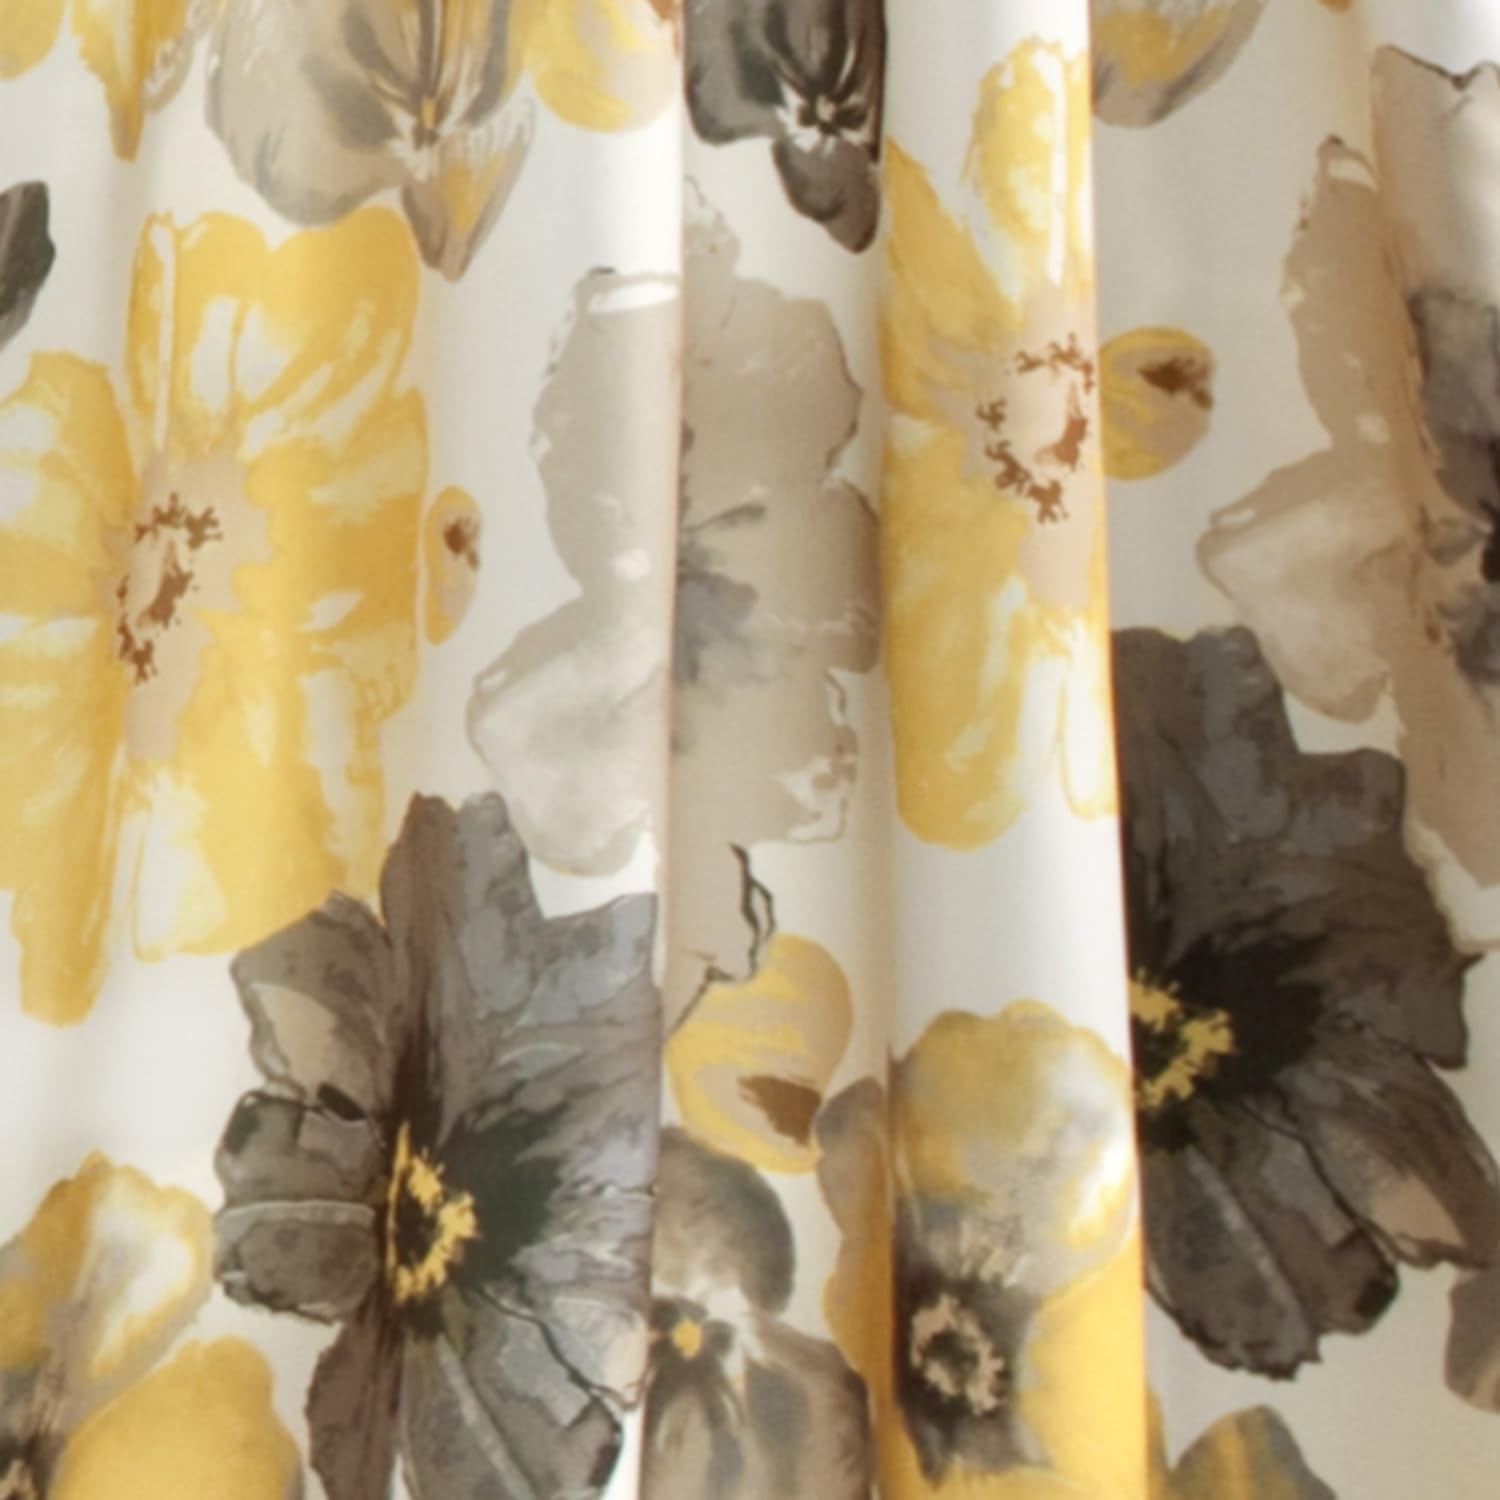 Leah Light Filtering Window Curtain Panel Pair Floral Insulated Grommet, 52"W X 95"L, Yellow and Gray